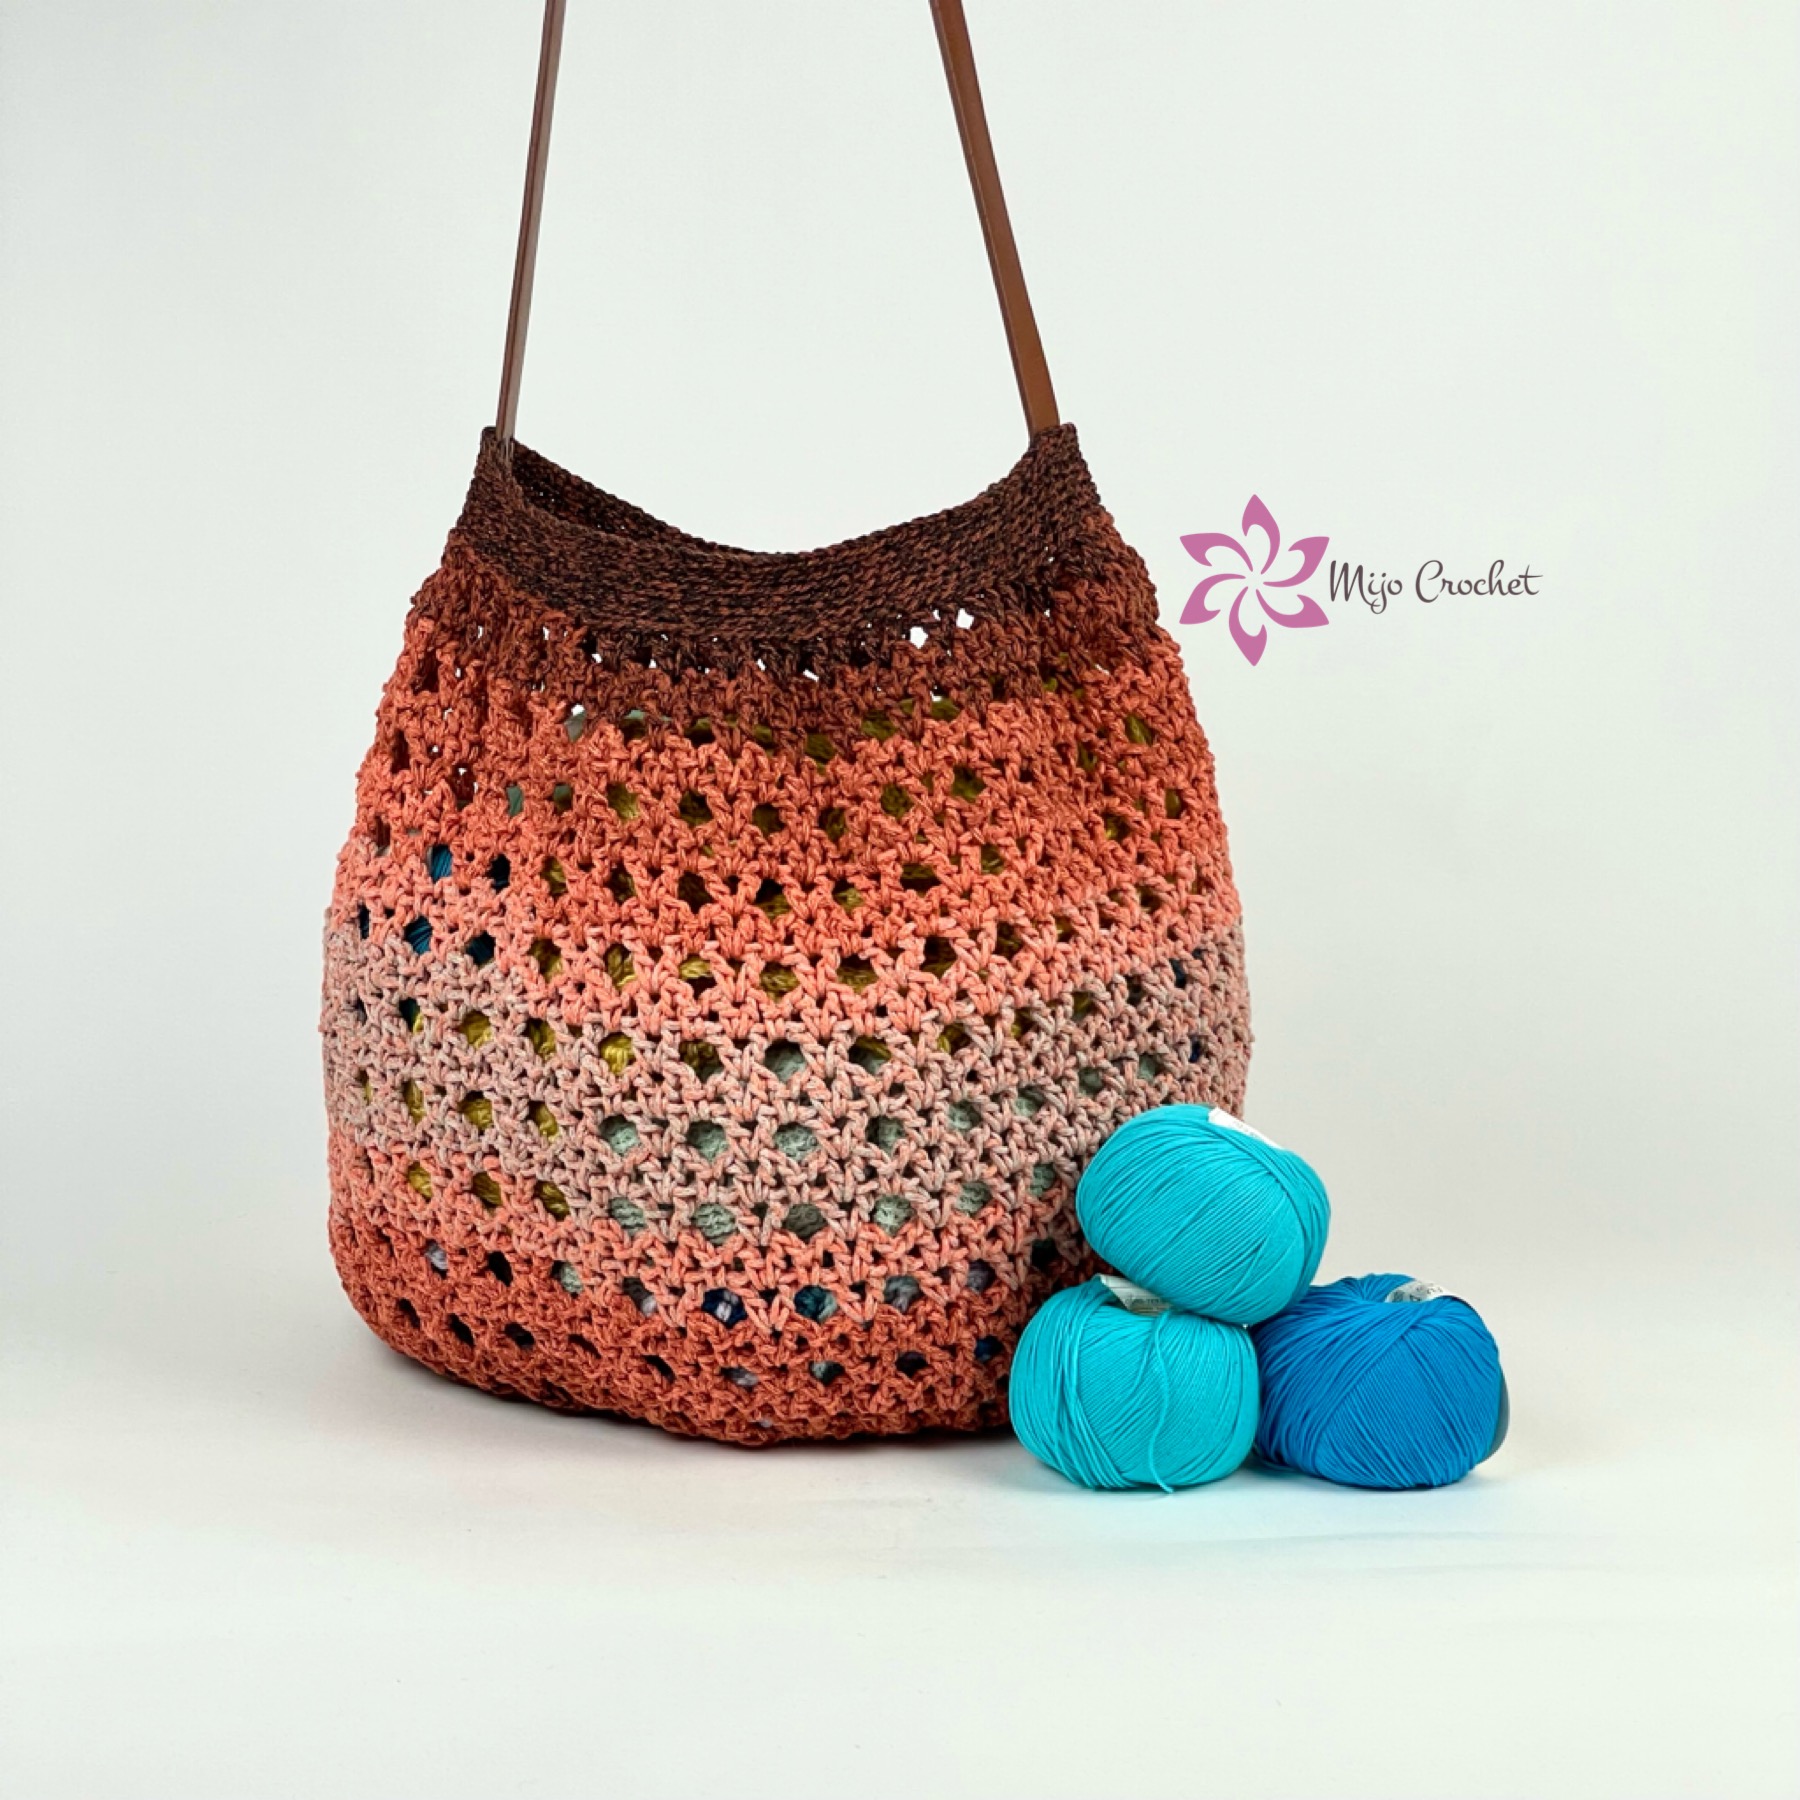 Crochet Tote Bag Pattern | The Summer Tote